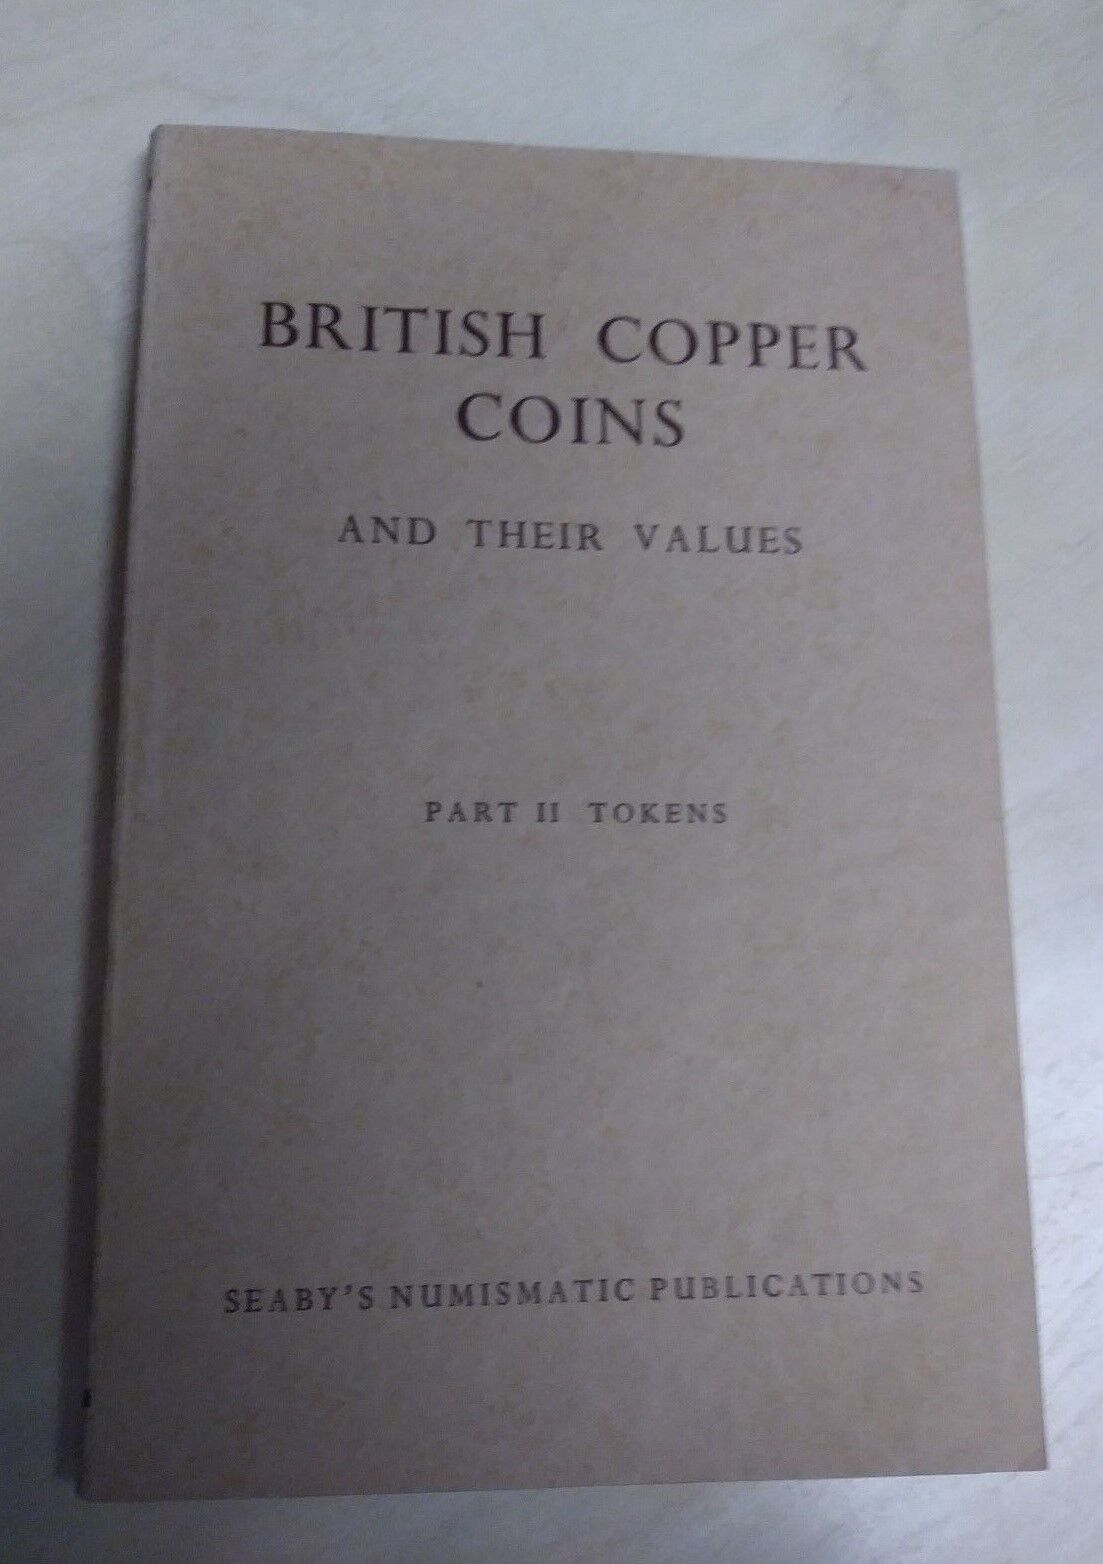 British Copper Coins and Their Values Part II Tokens Seaby